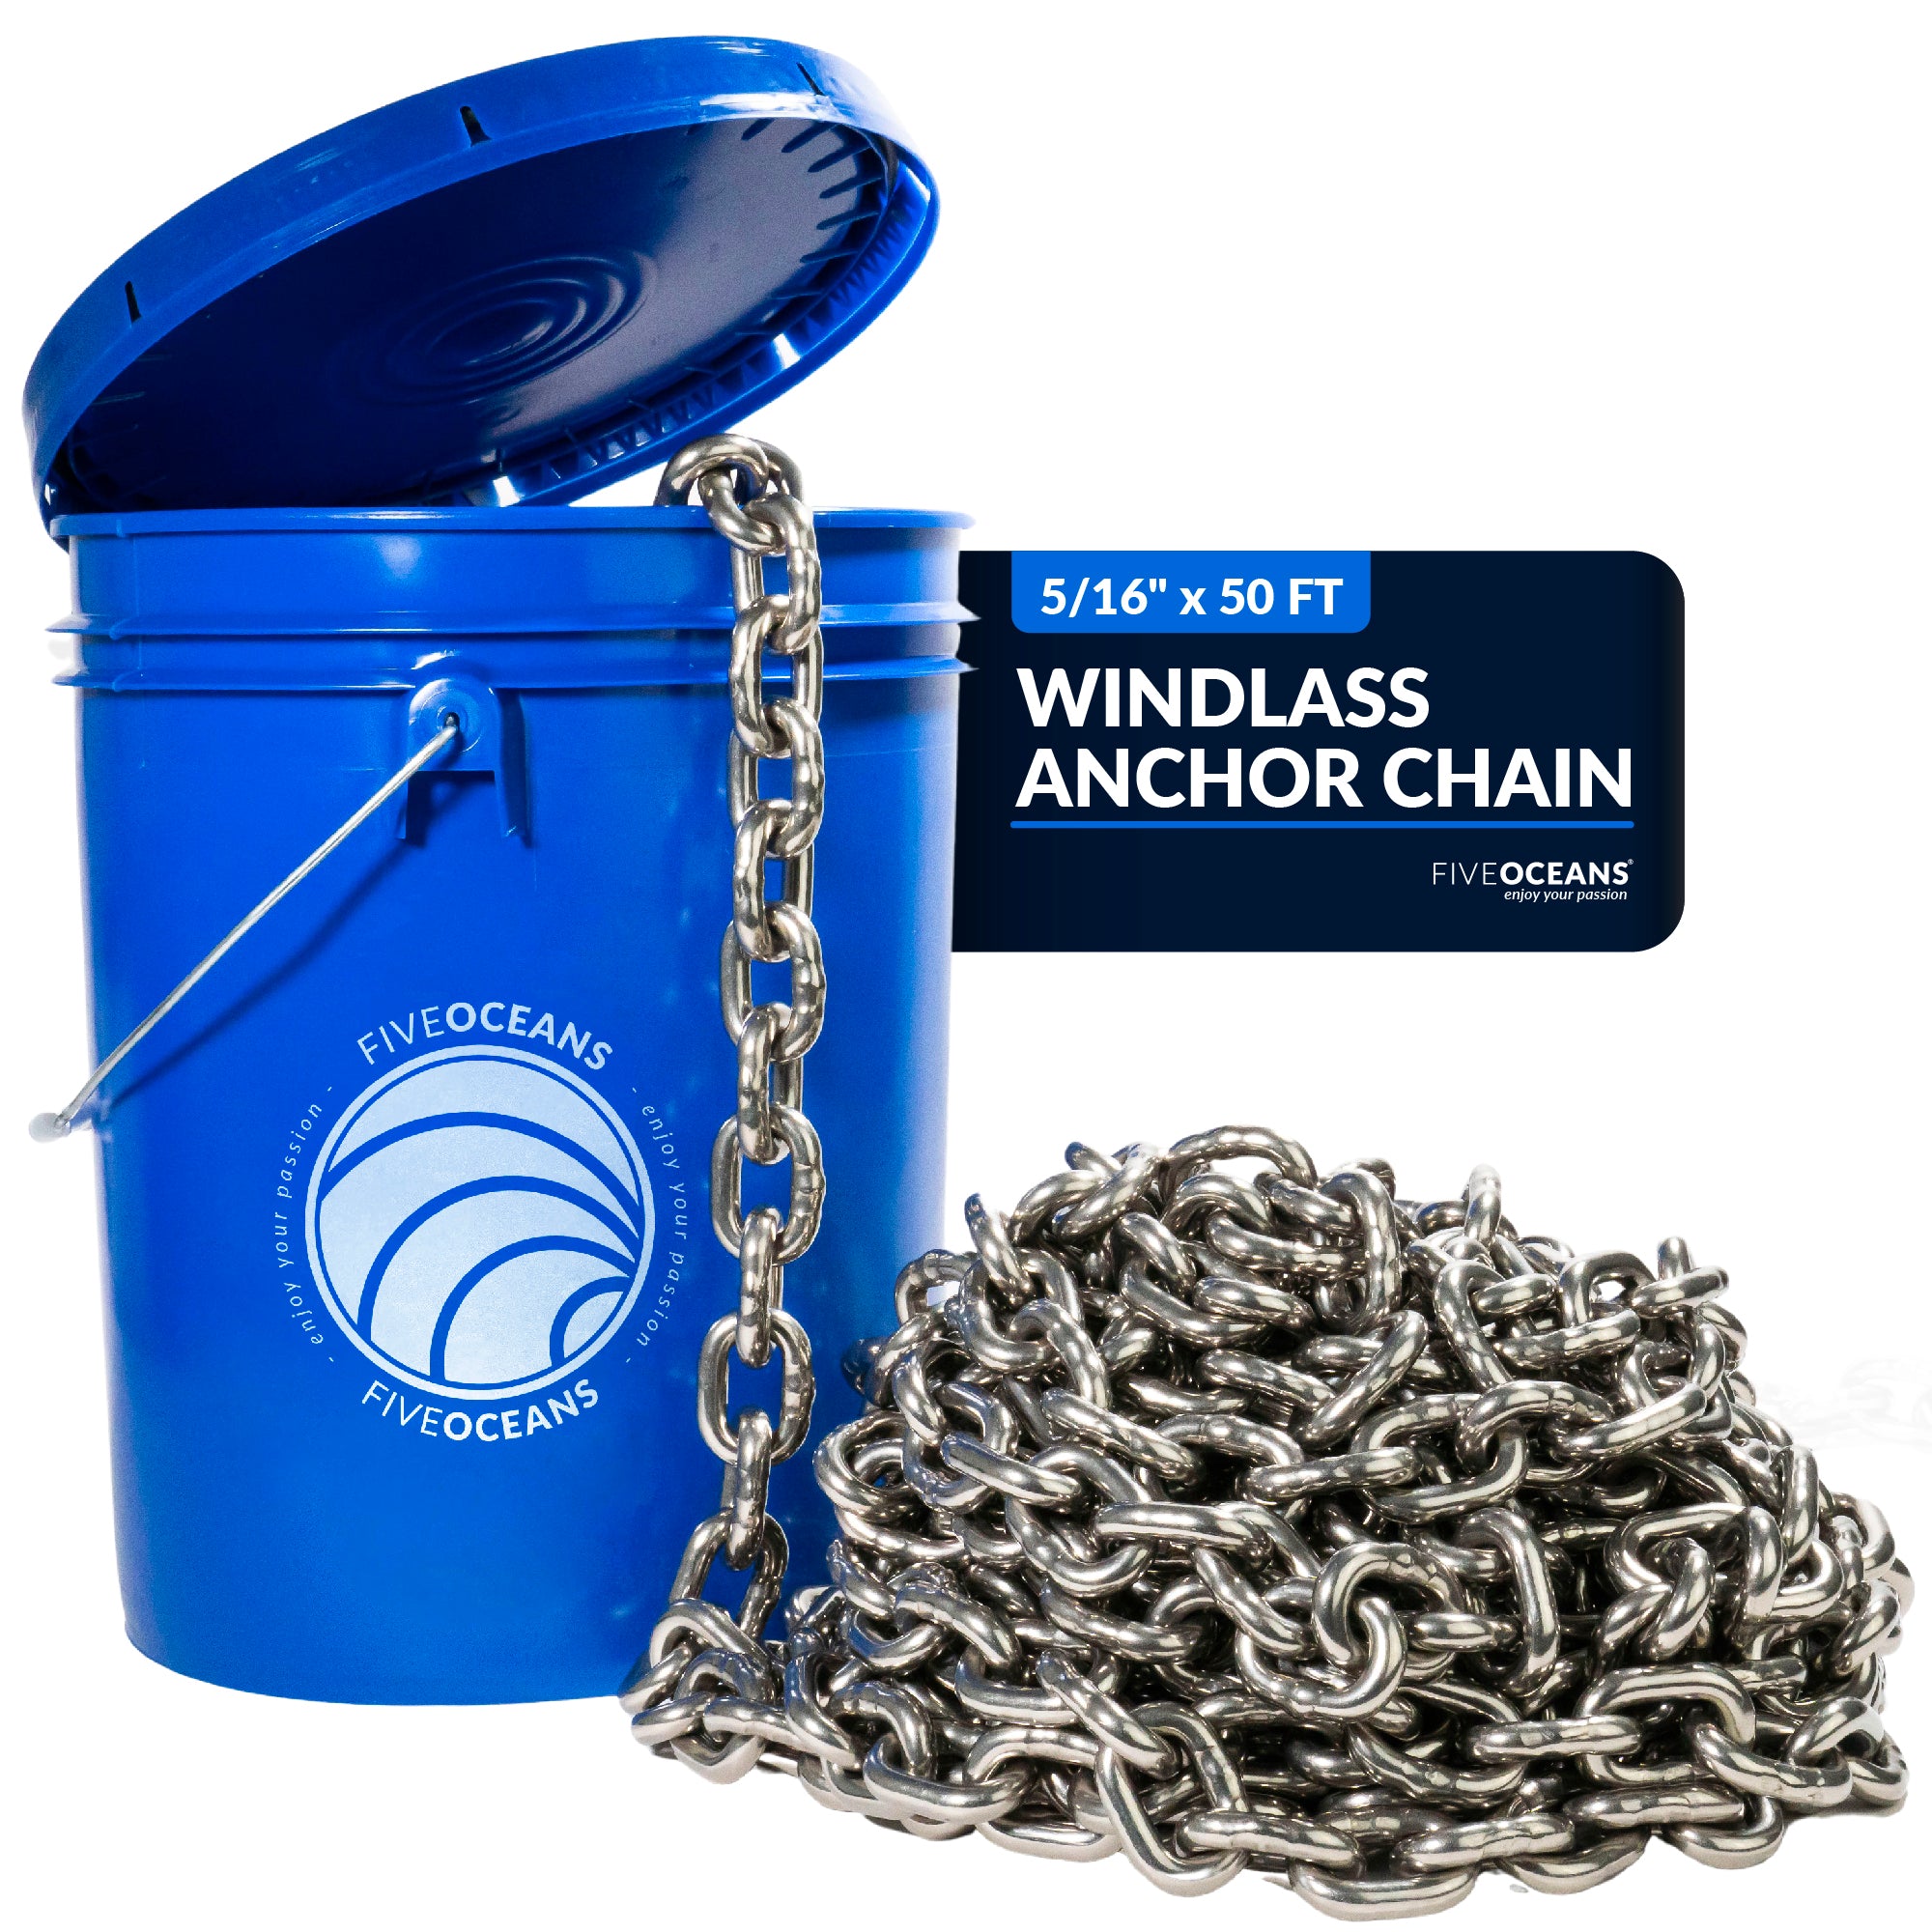 5/16" x 50'  Boat Windlass Anchor Chain HT G4 Stainless Steel - FO4493-M50